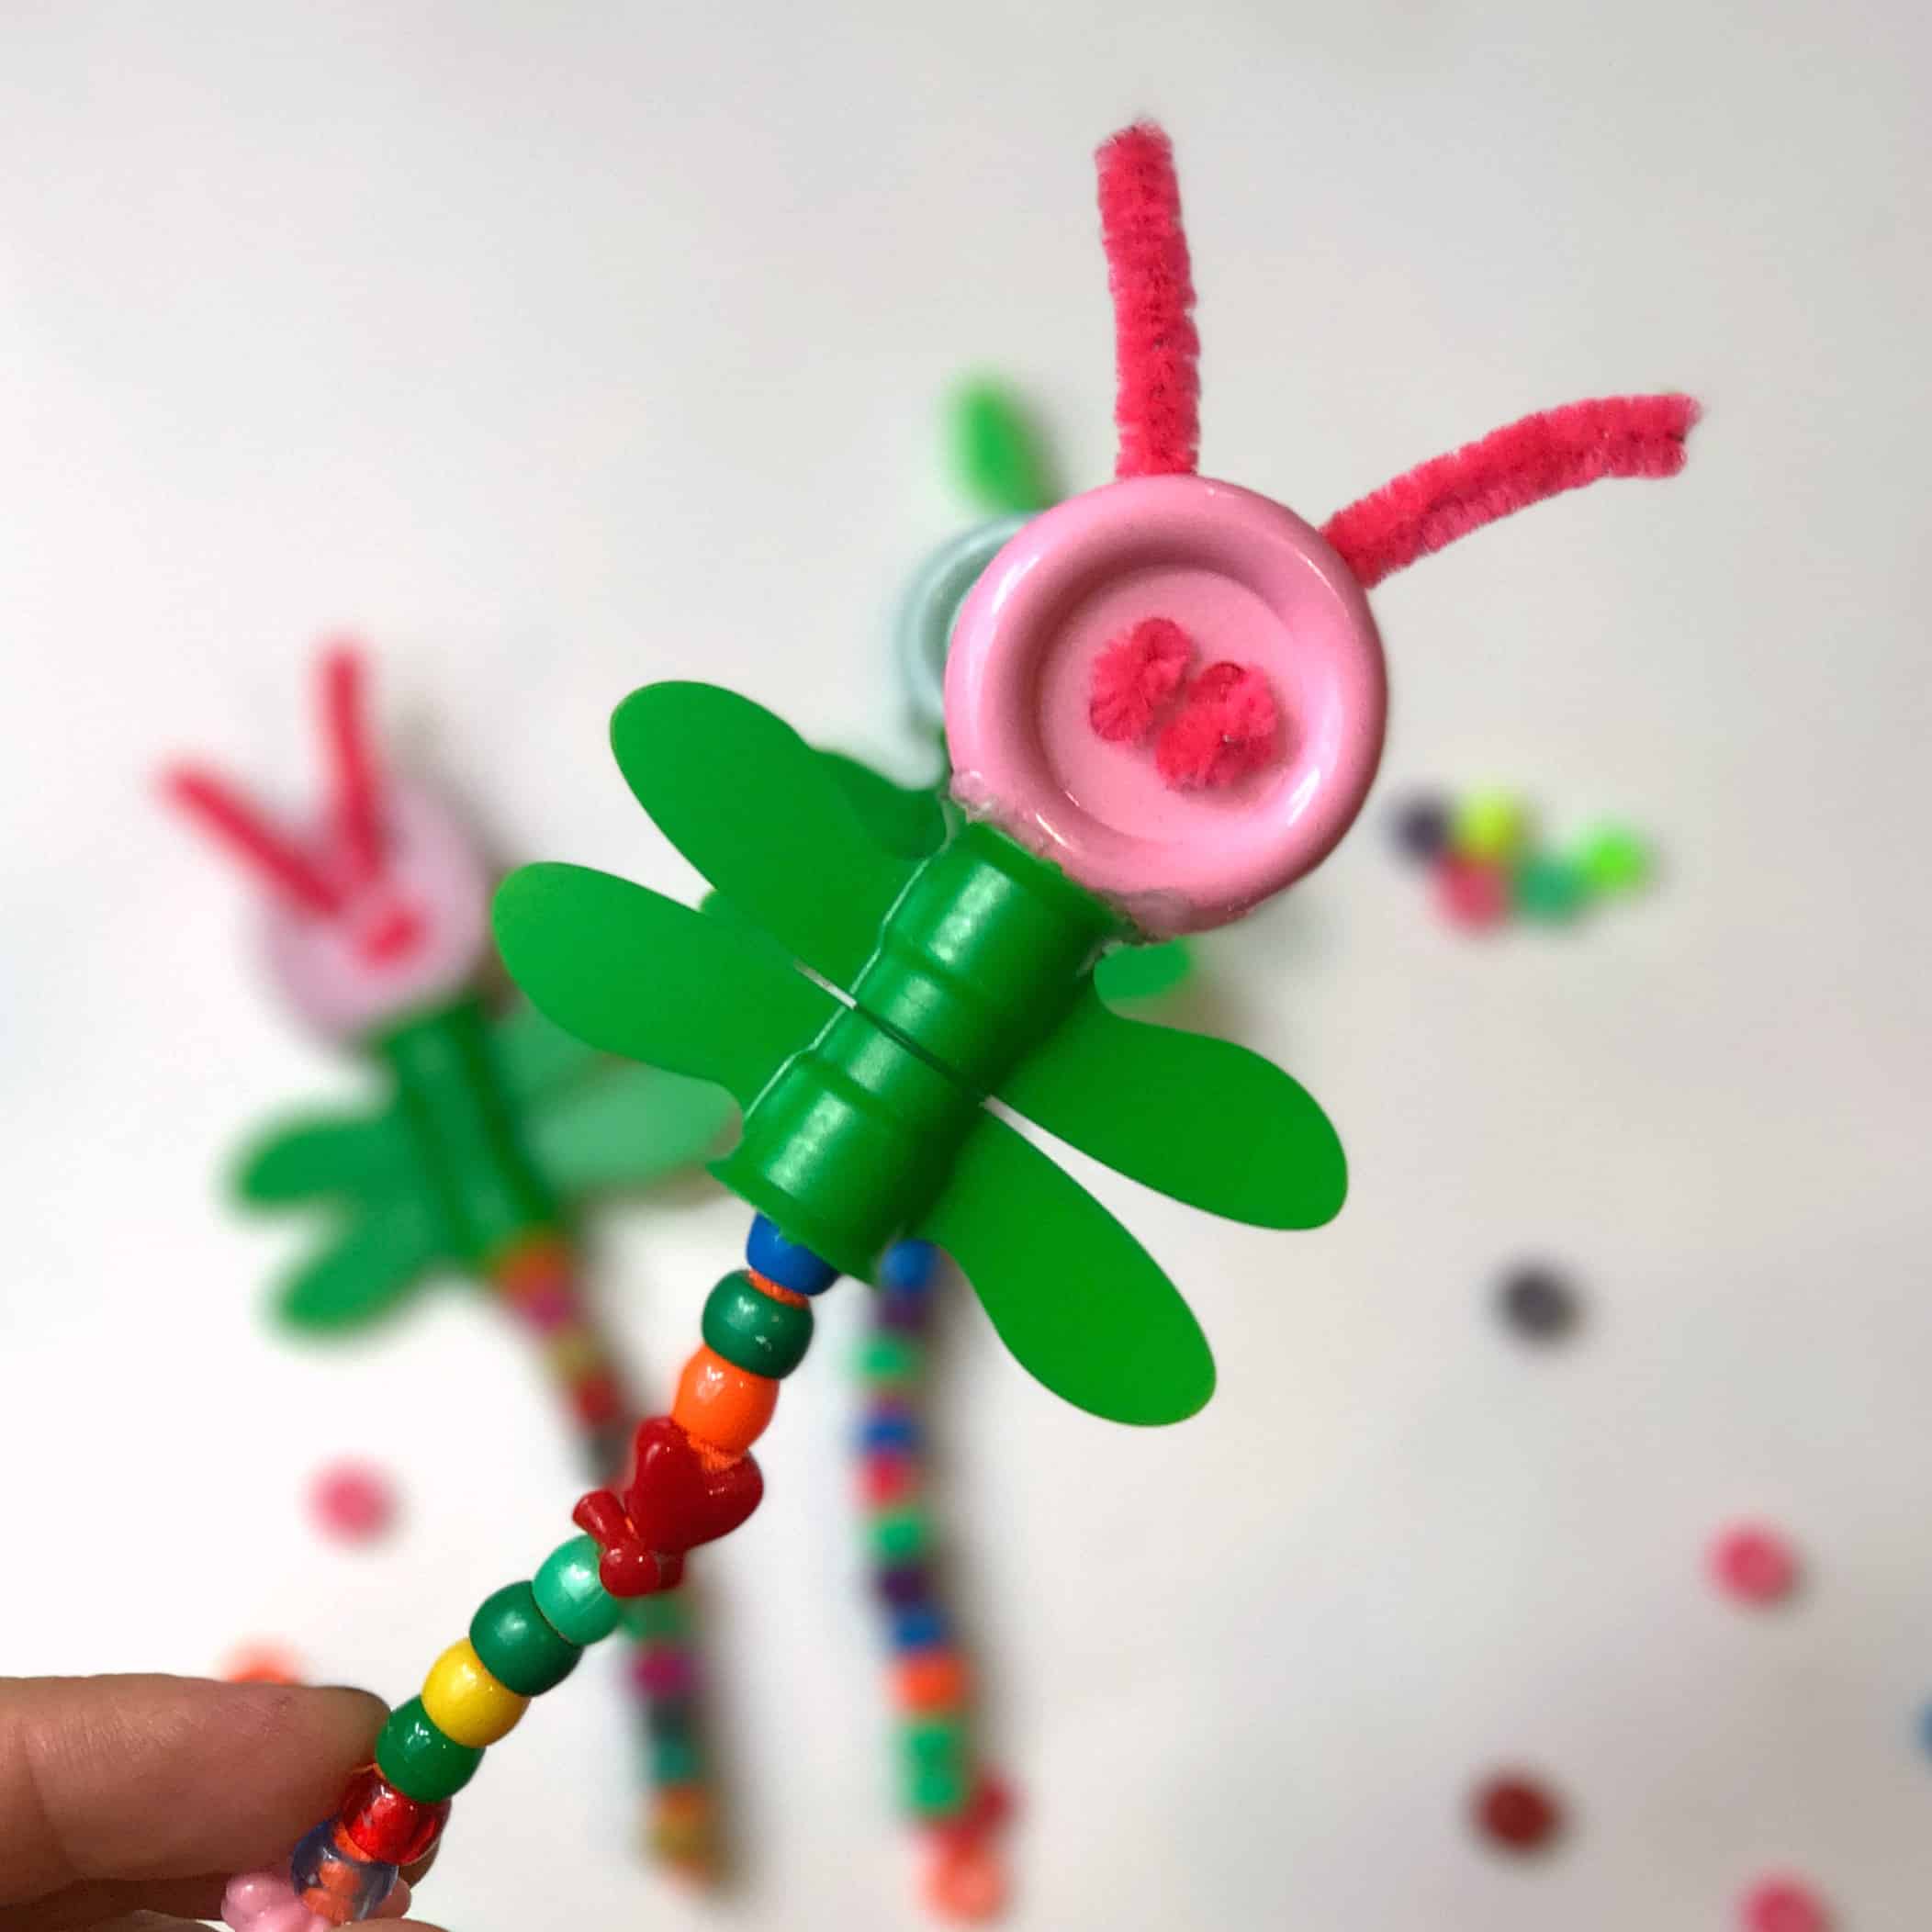 Use applesauce pouch caps to create this cute dragonfly kids craft! A fun upcycled fine motor activities for kids of many ages.